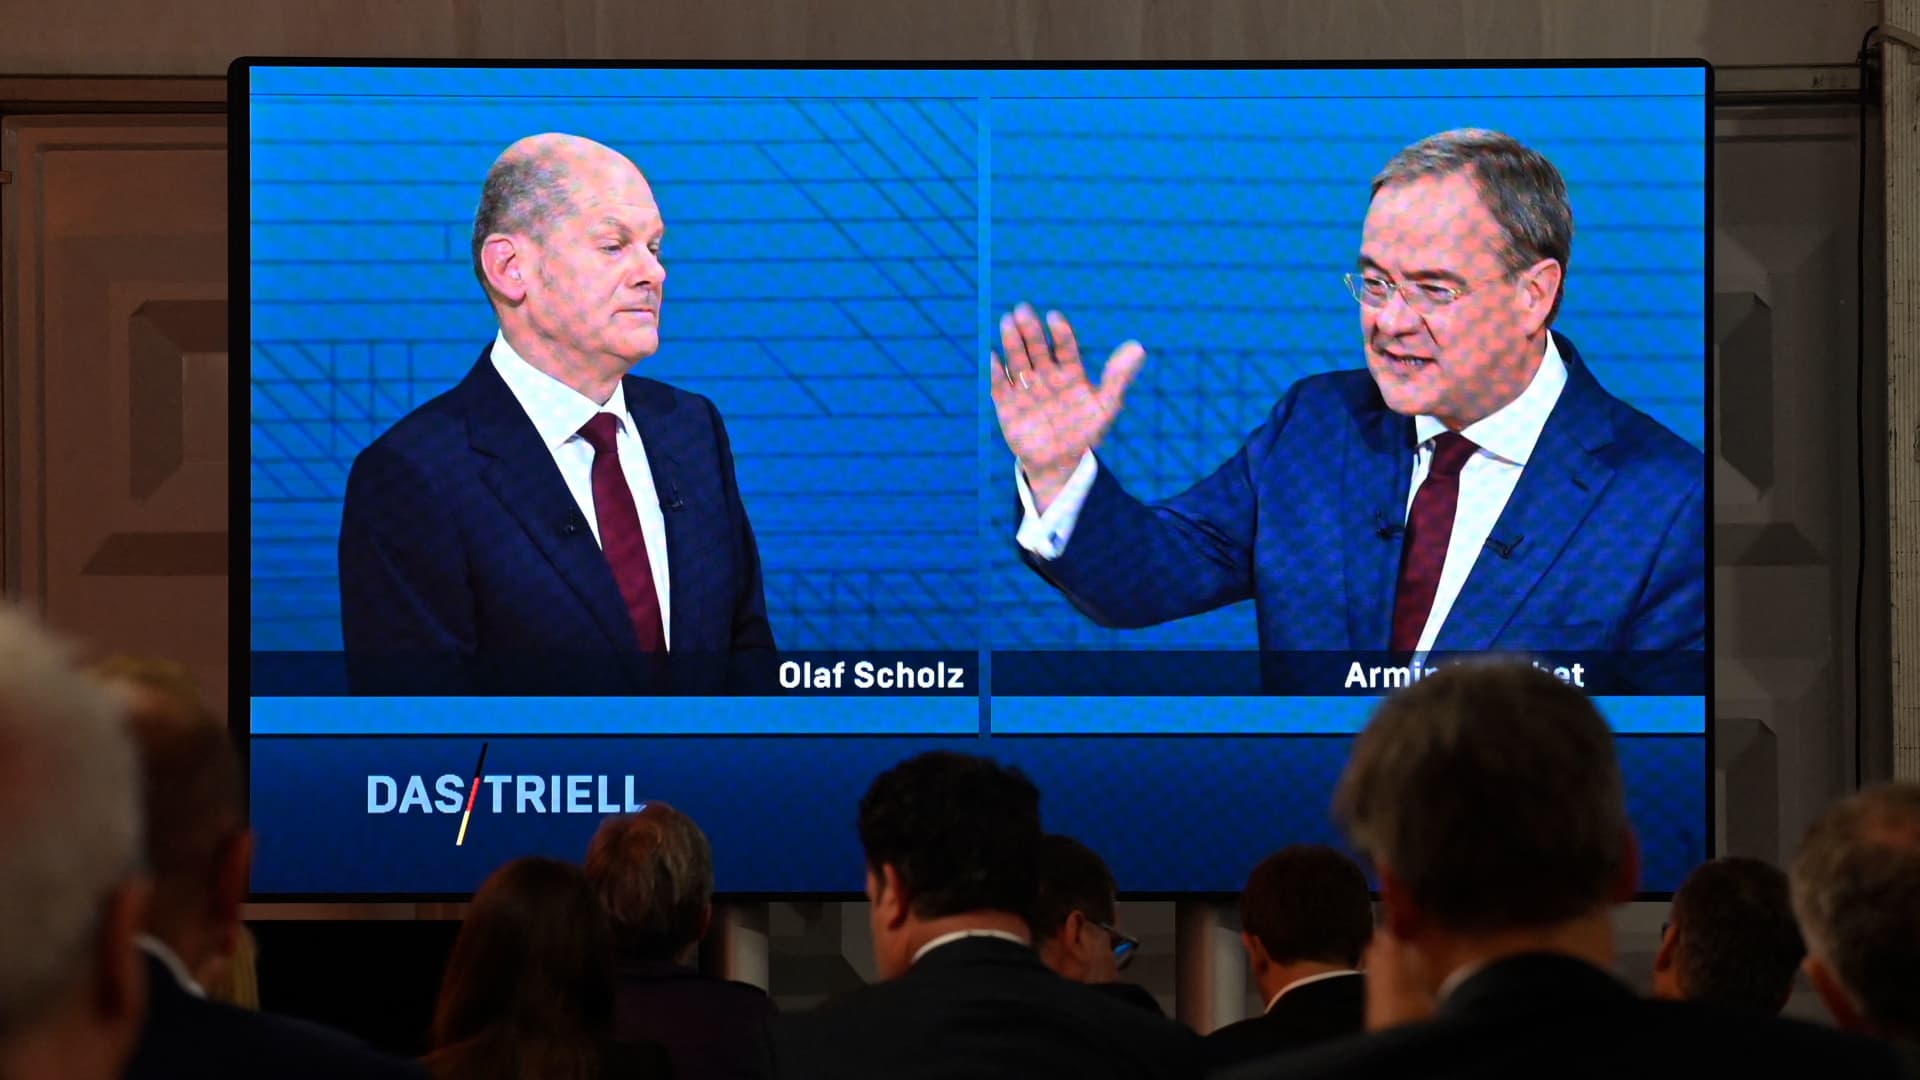 Journalists and party members watch on a screen from the press centre (L-R) Olaf Scholz, German Finance Minister, Vice-Chancellor and the Social Democrats (SPD) candidate for Chancellor and Armin Laschet, North Rhine-Westphalia's State Premier and the Christian Democratic Union (CDU) candidate for Chancellor as they attend an election TV debate in Berlin on September 12.